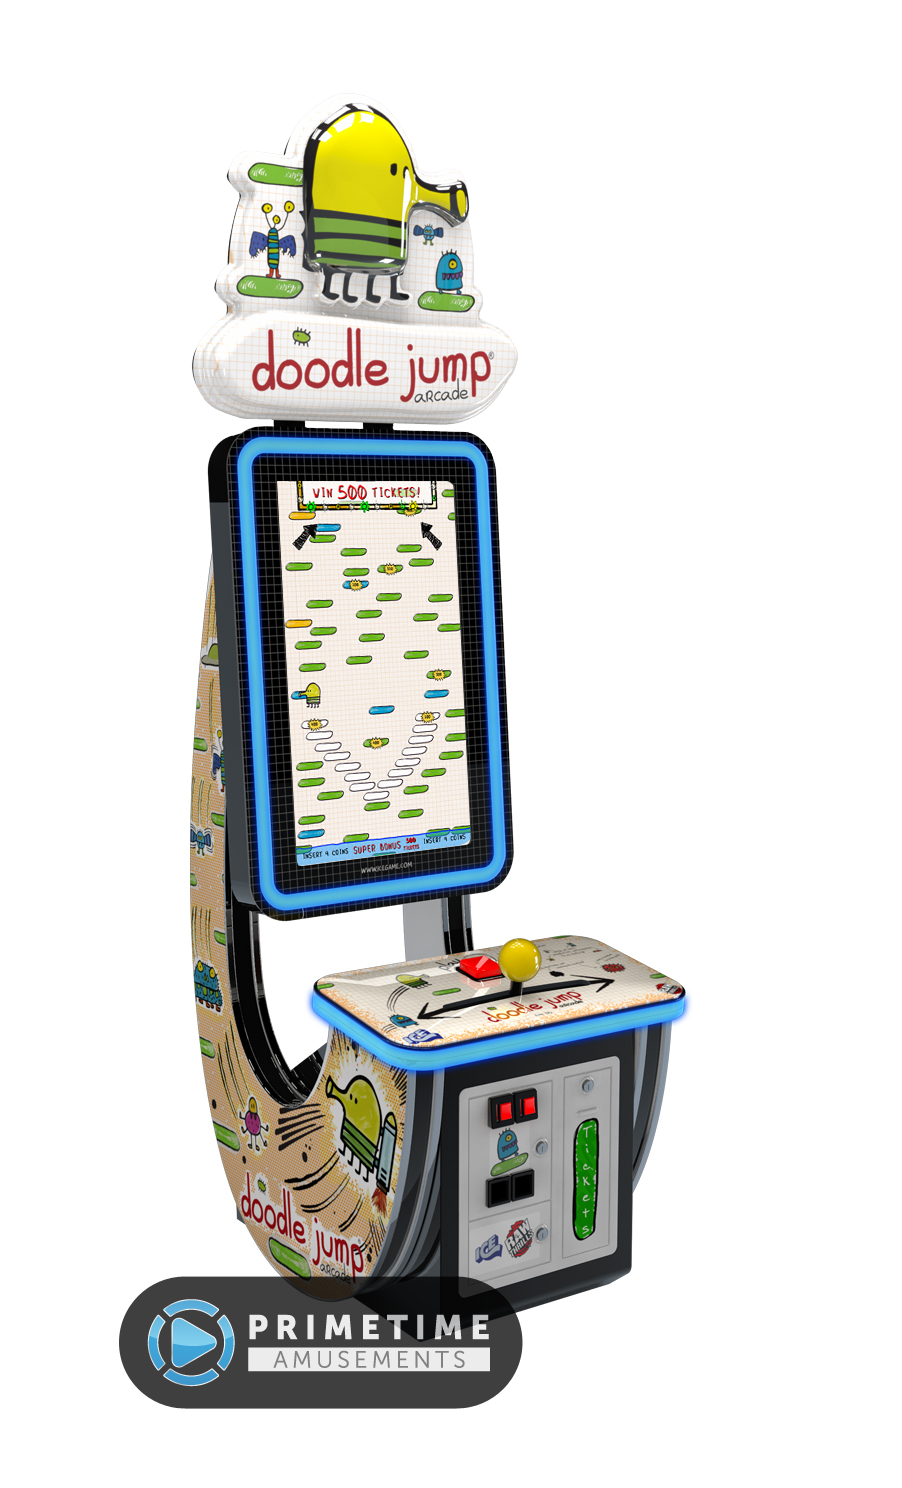 How to Make, Create or Develop Game Like Doodle Jump